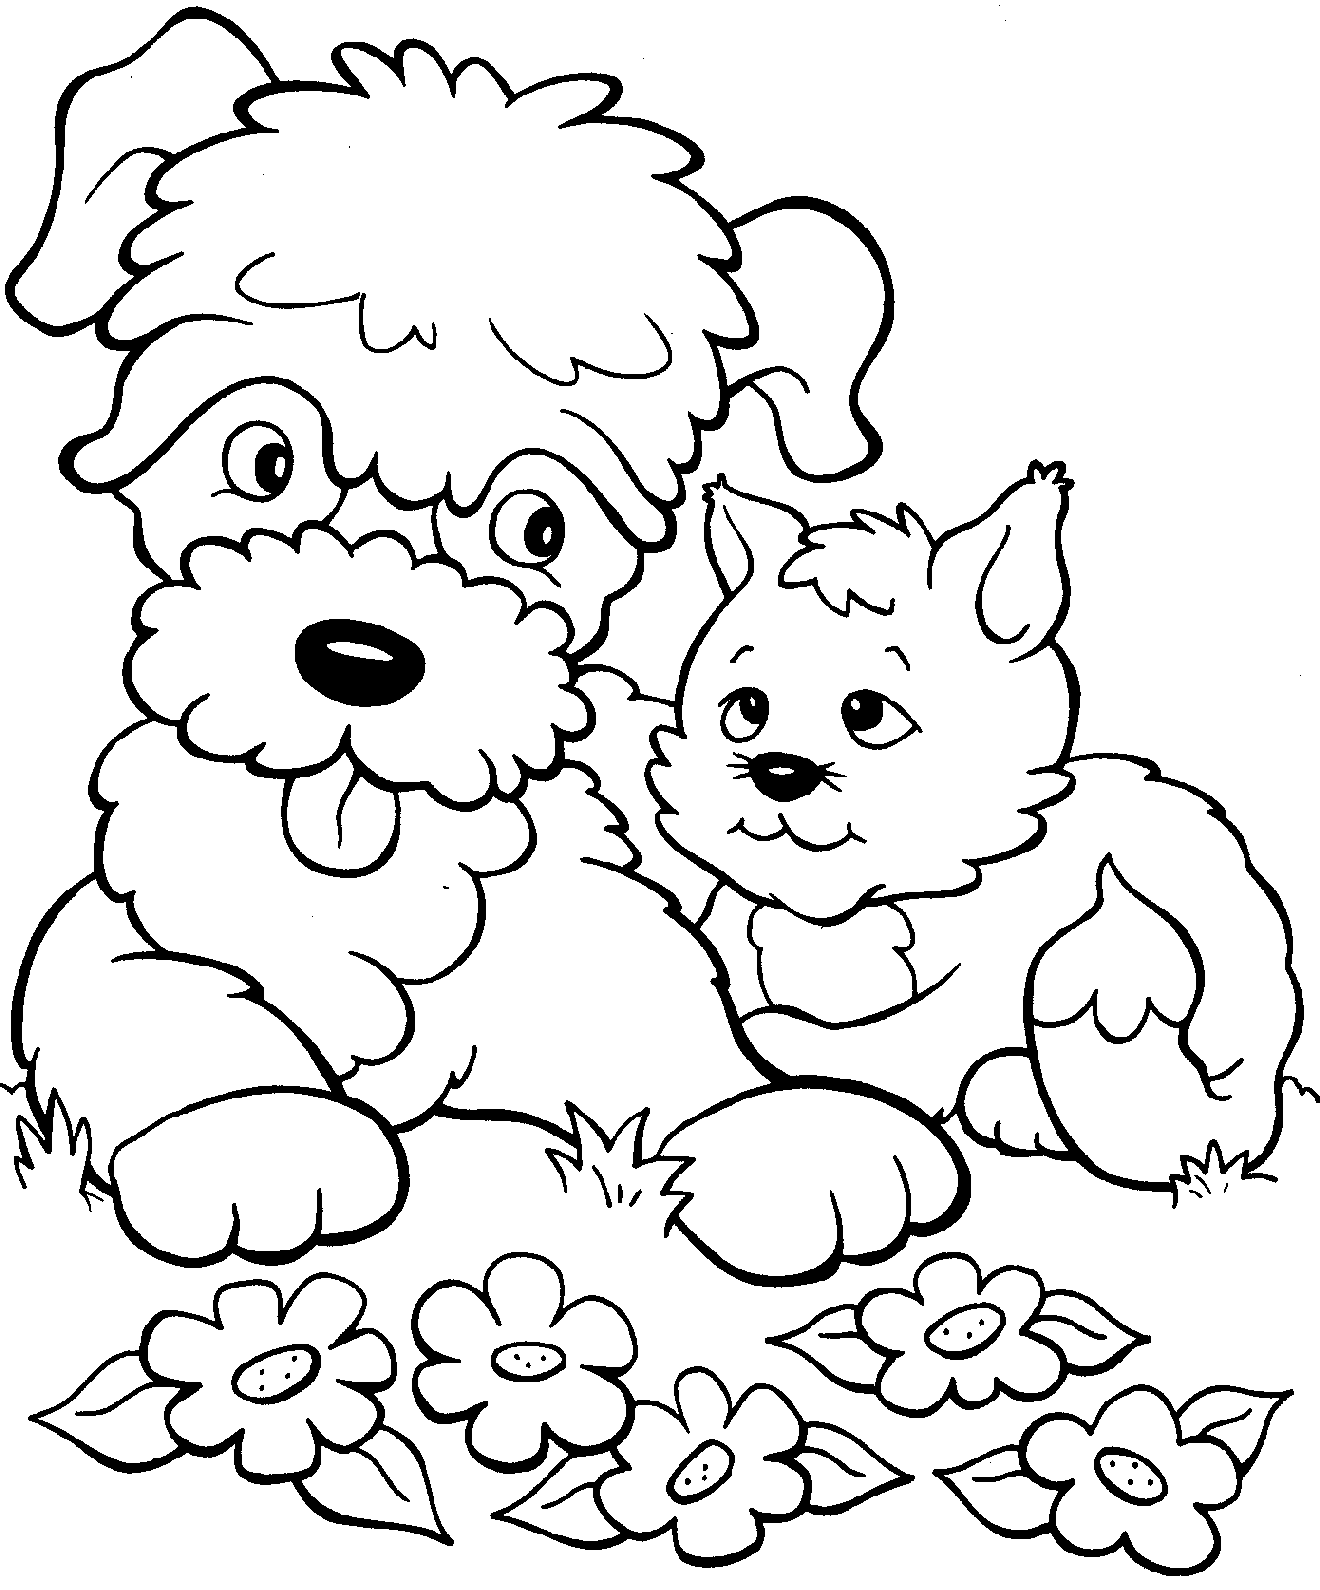 kitten coloring kitten coloring pages best coloring pages for kids coloring kitten 1 1